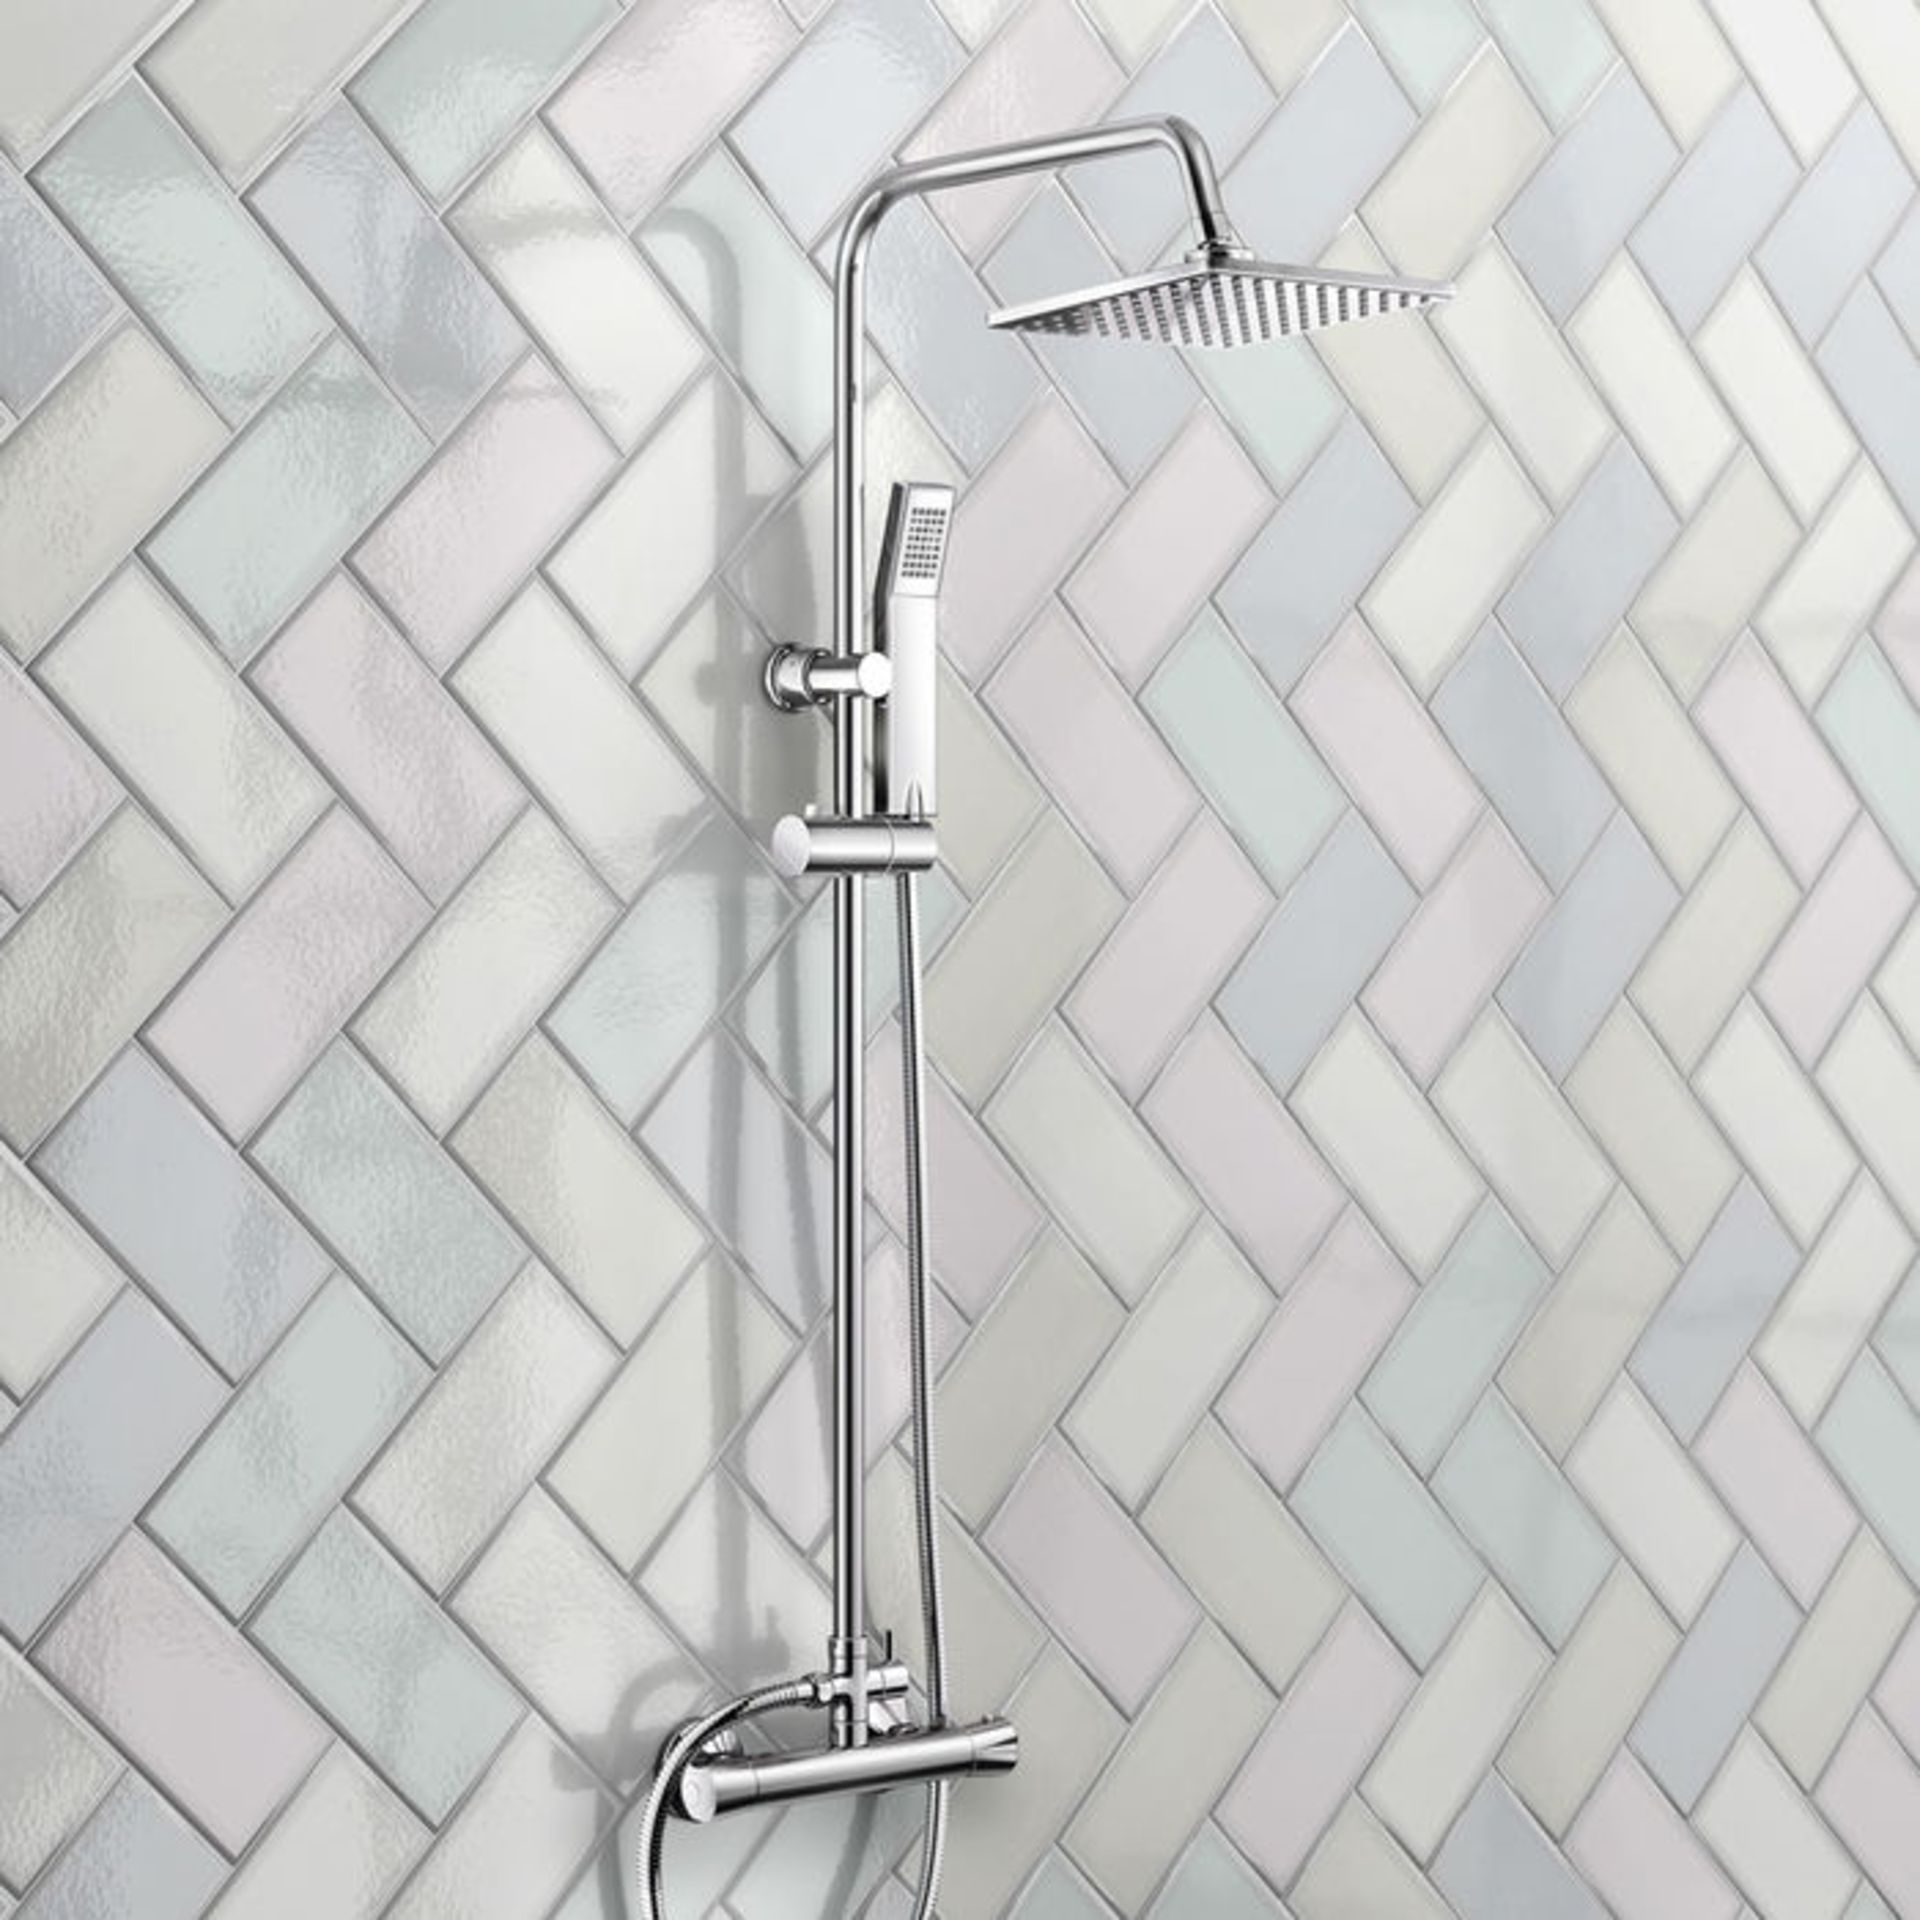 (AL281) Square Exposed Thermostatic Shower Kit & Medium Head. Curved features and contemporary - Image 3 of 3